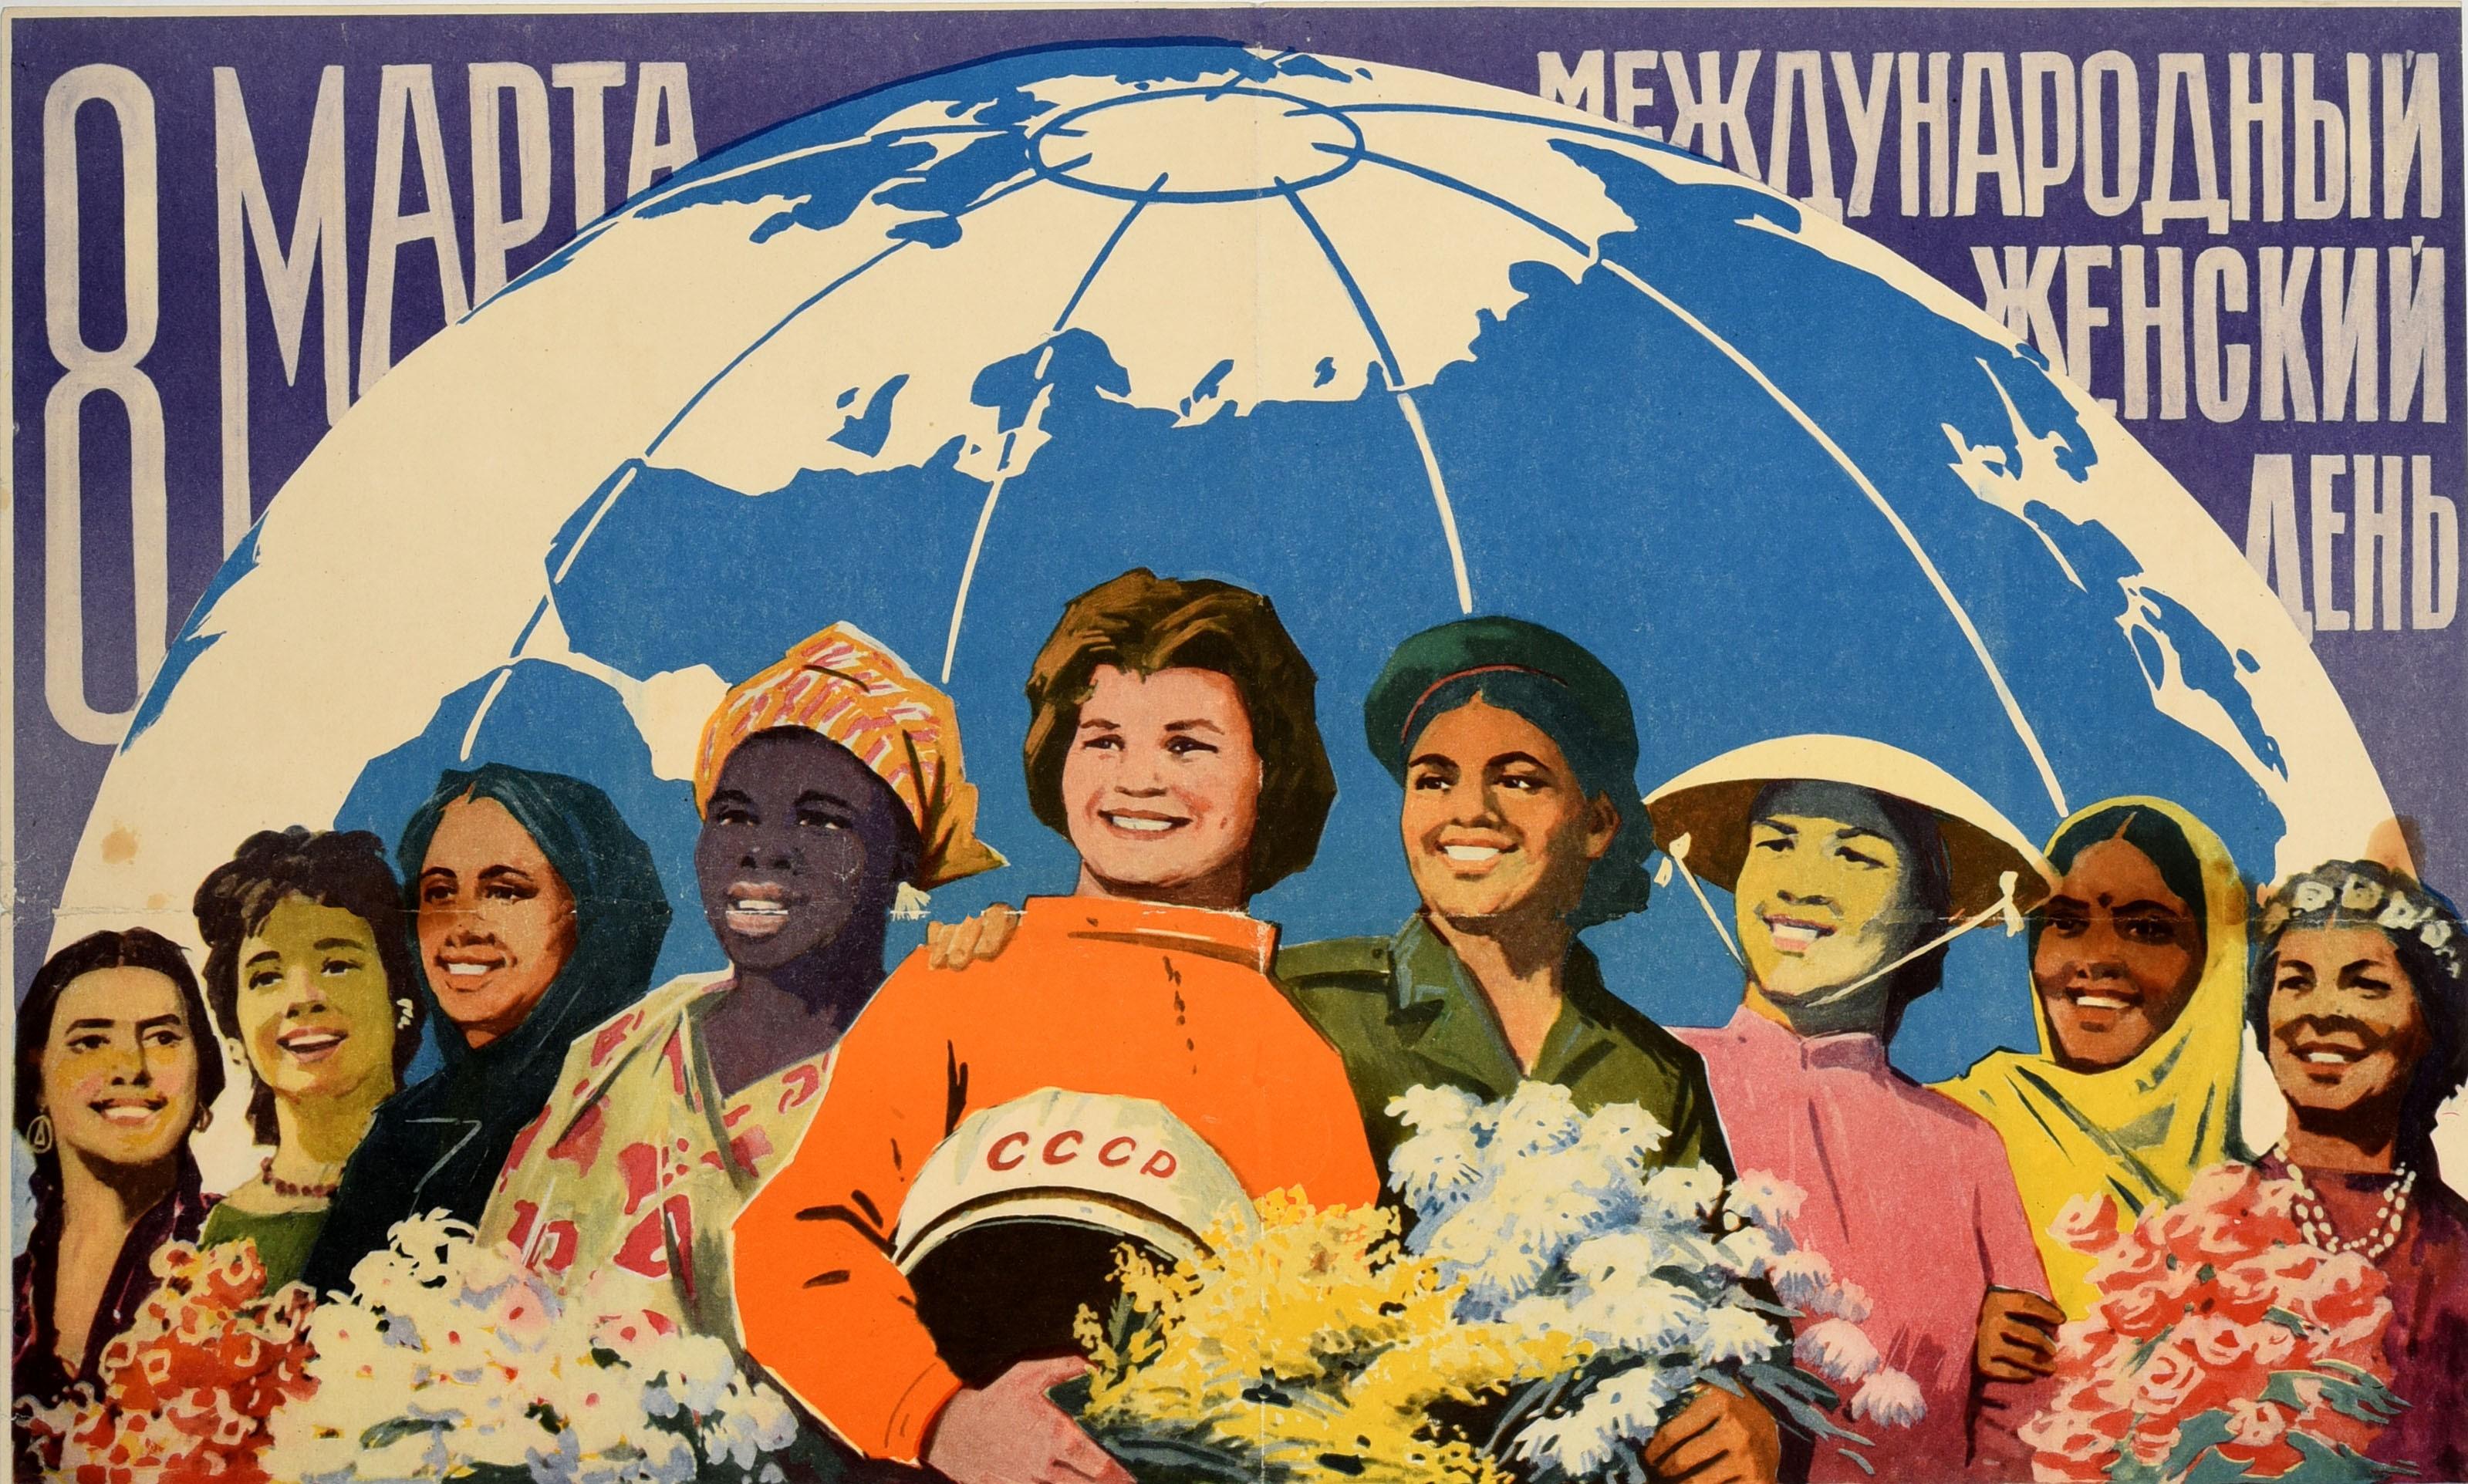 Original vintage Soviet propaganda poster for International Women's Day on 8 March 1964 featuring a great design depicting the first woman in space Valentina Tereshkova (Valentina Vladimirovna Tereshkova; b 1937) smiling in front of a globe holding